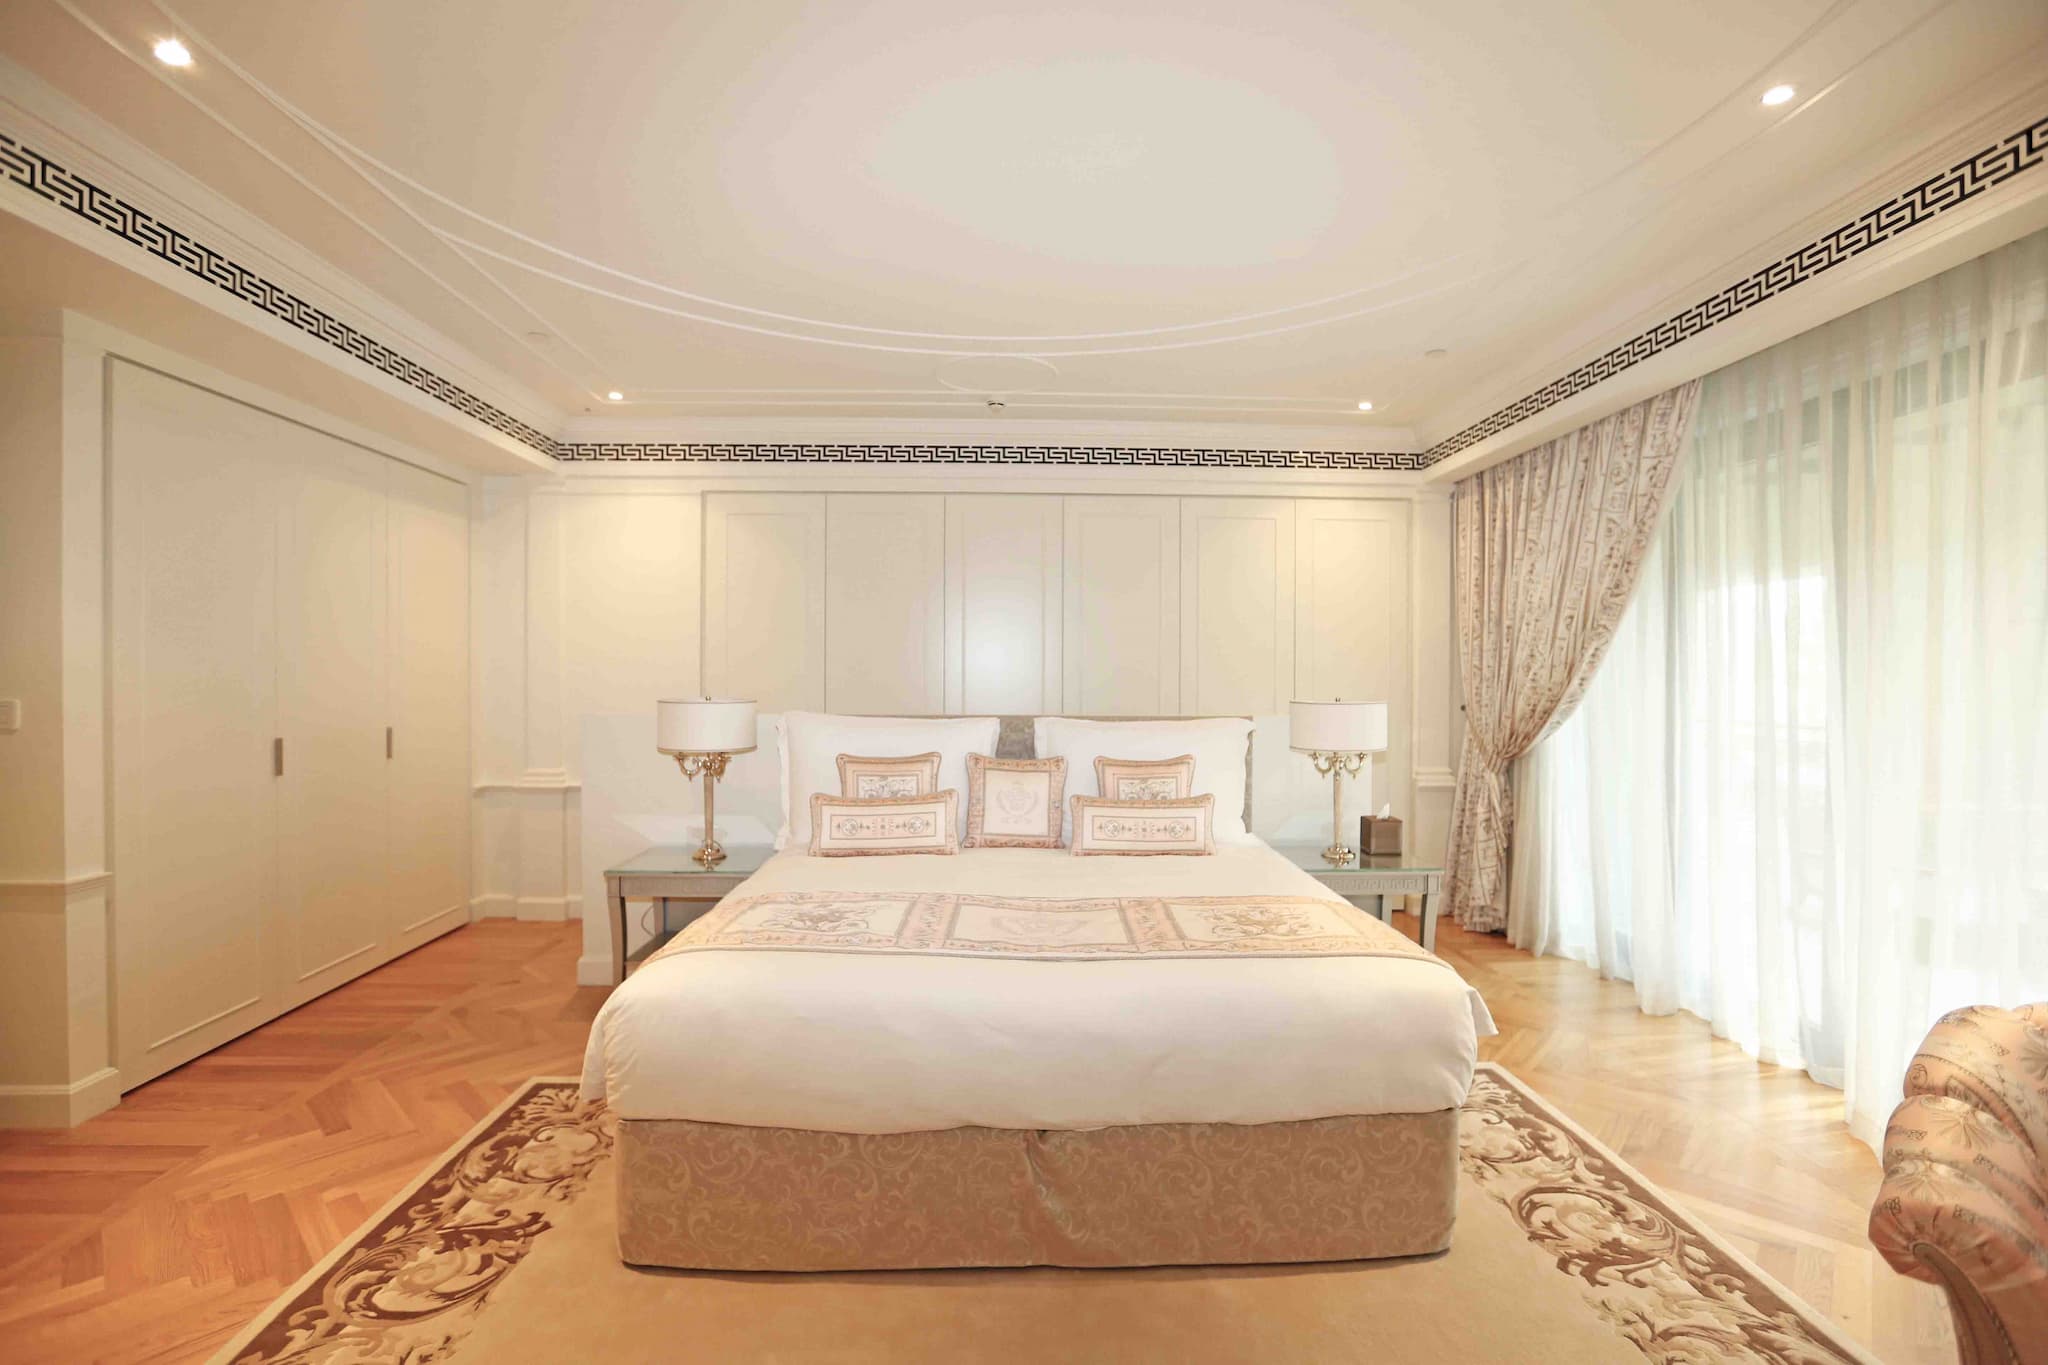 3 Bedroom Serviced Residences For Sale Palazzo Versace Lp0347 24d4a069d97ab600.jpg